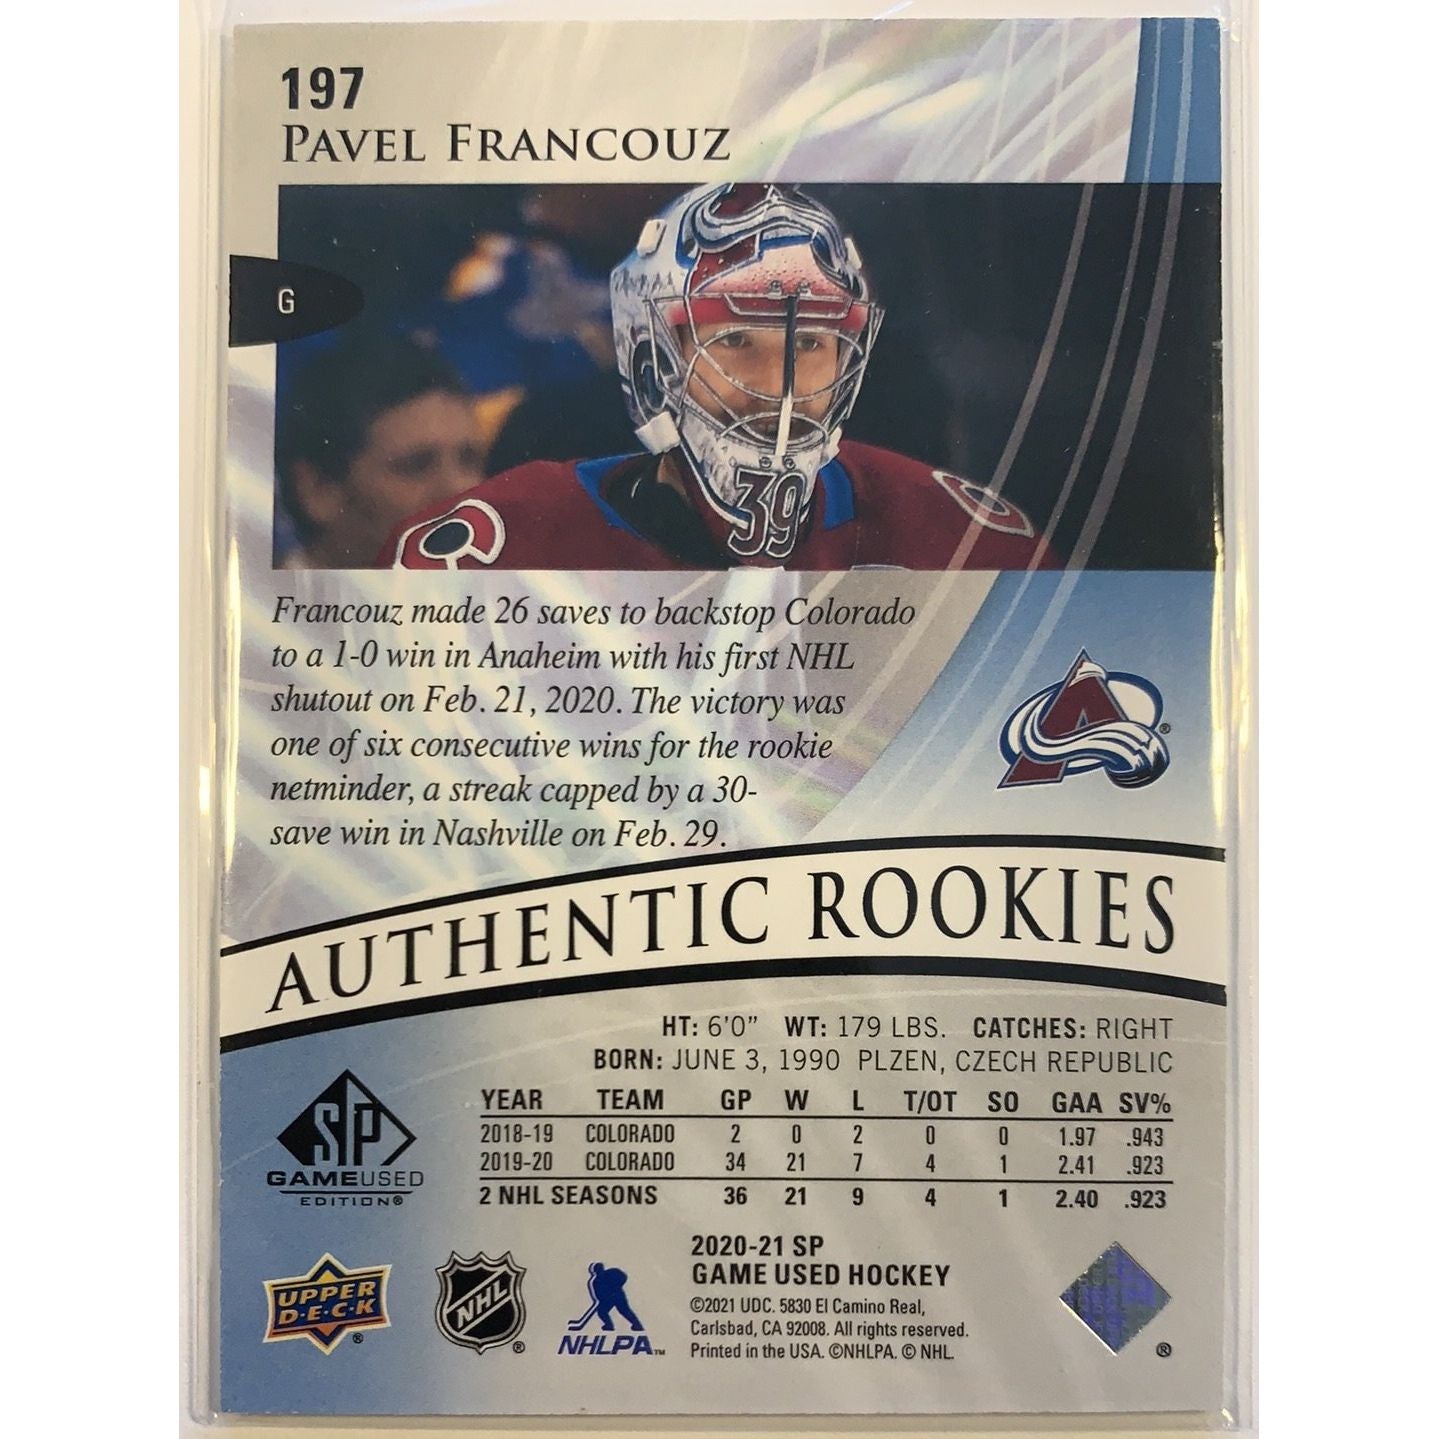  2020-21 SP Game Used Edition Pavel Francouz Authentic Rookies /199  Local Legends Cards & Collectibles